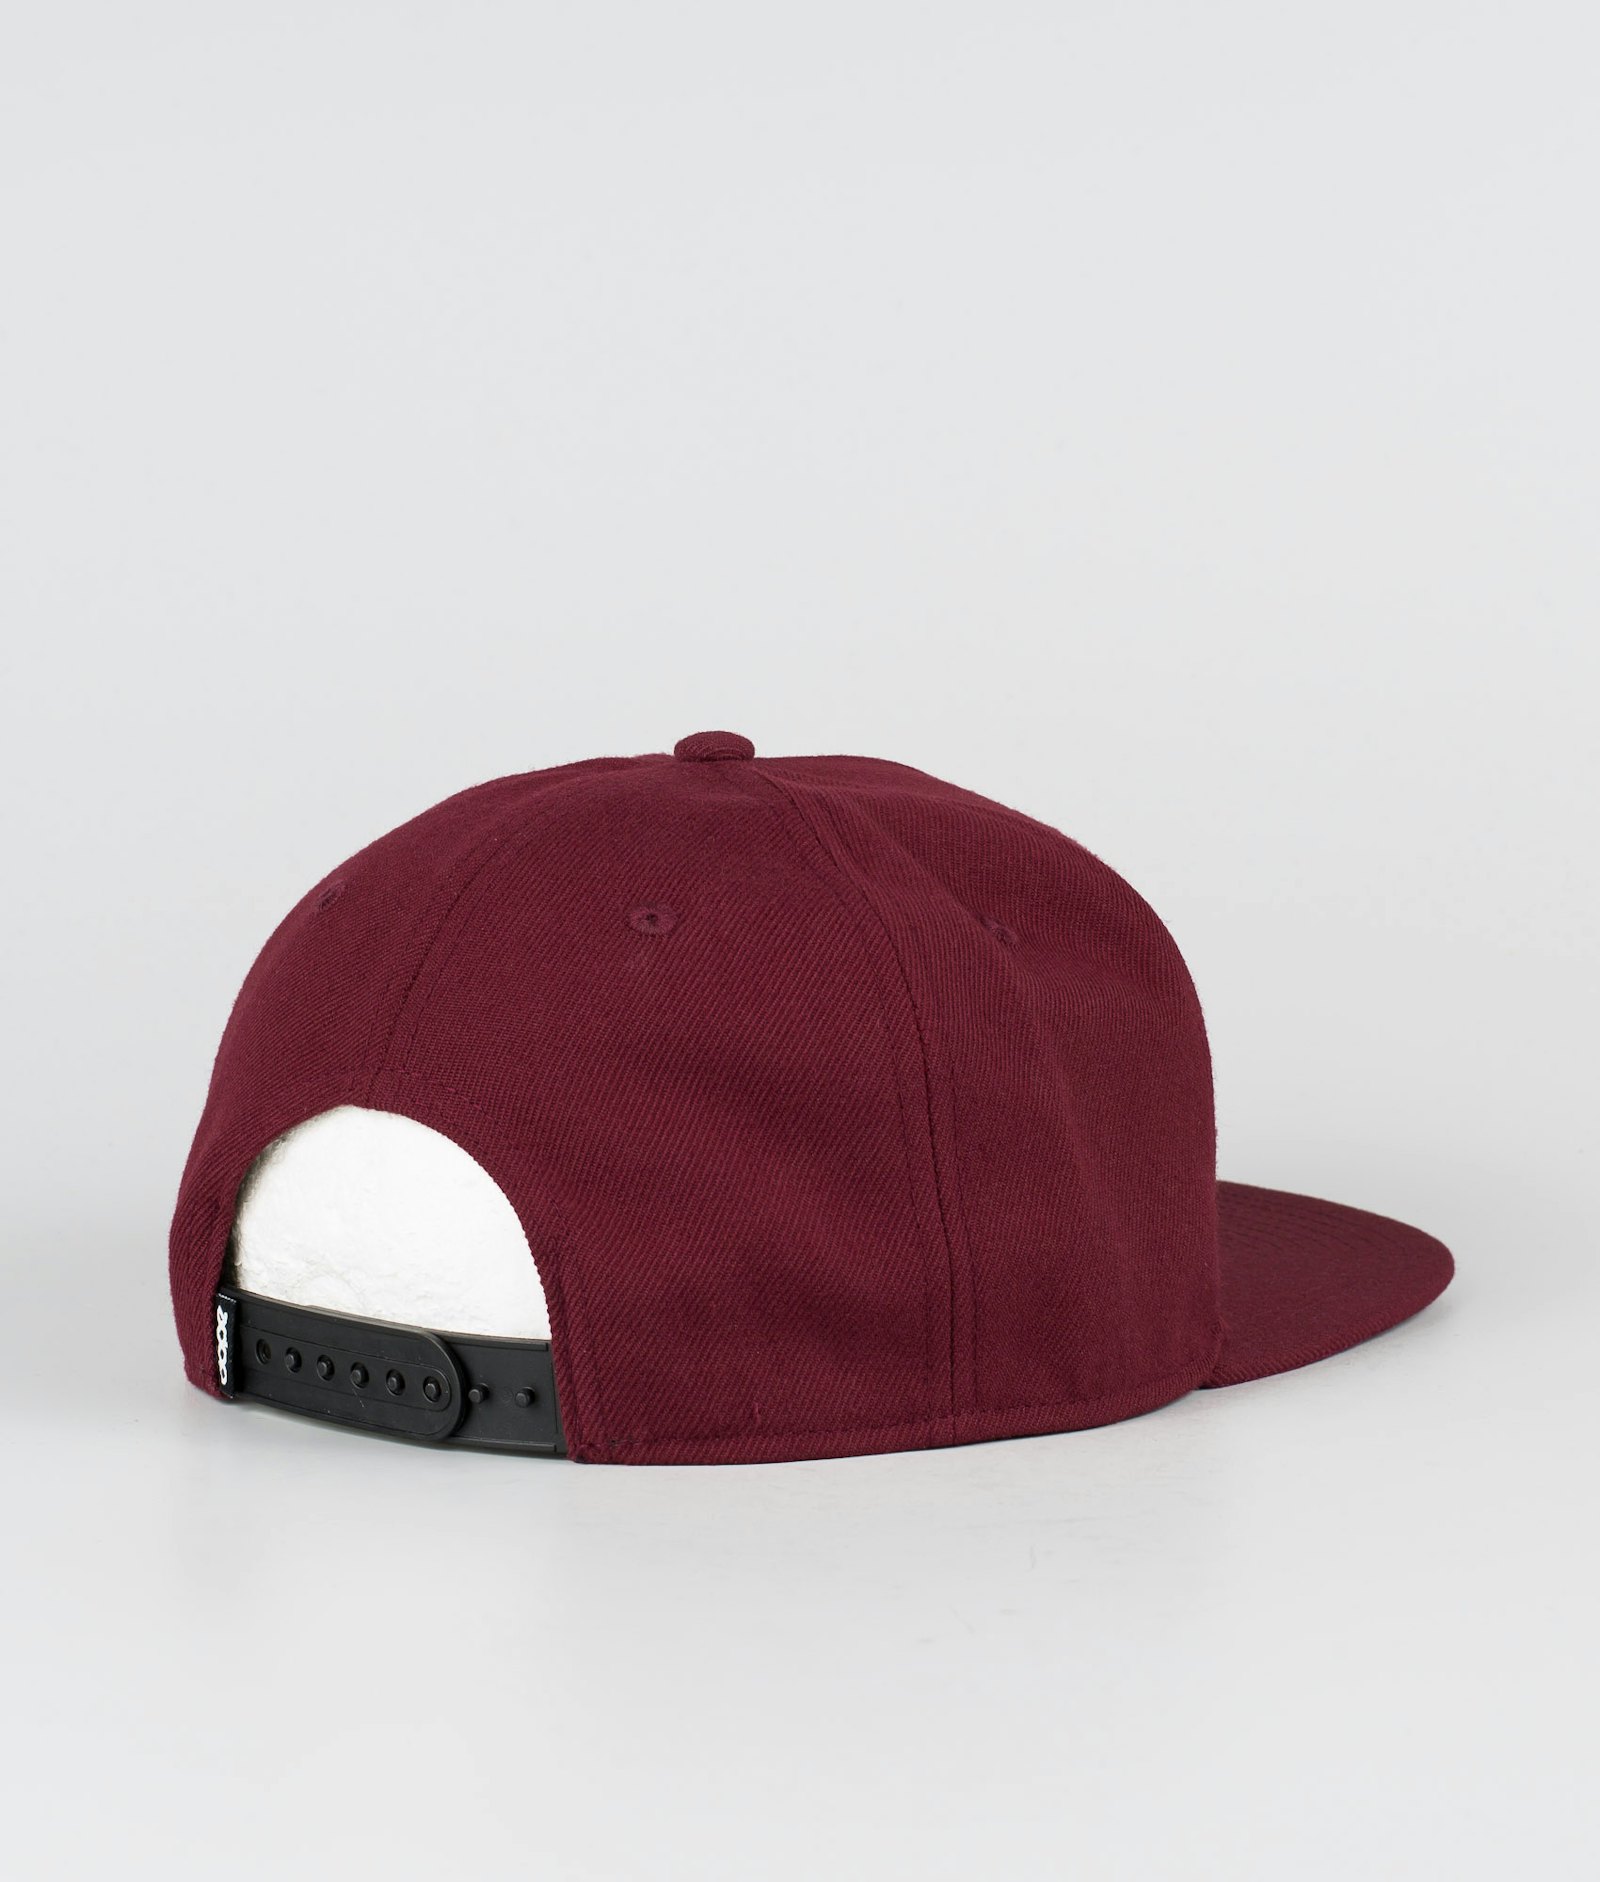 Dope Patched Lippis Burgundy